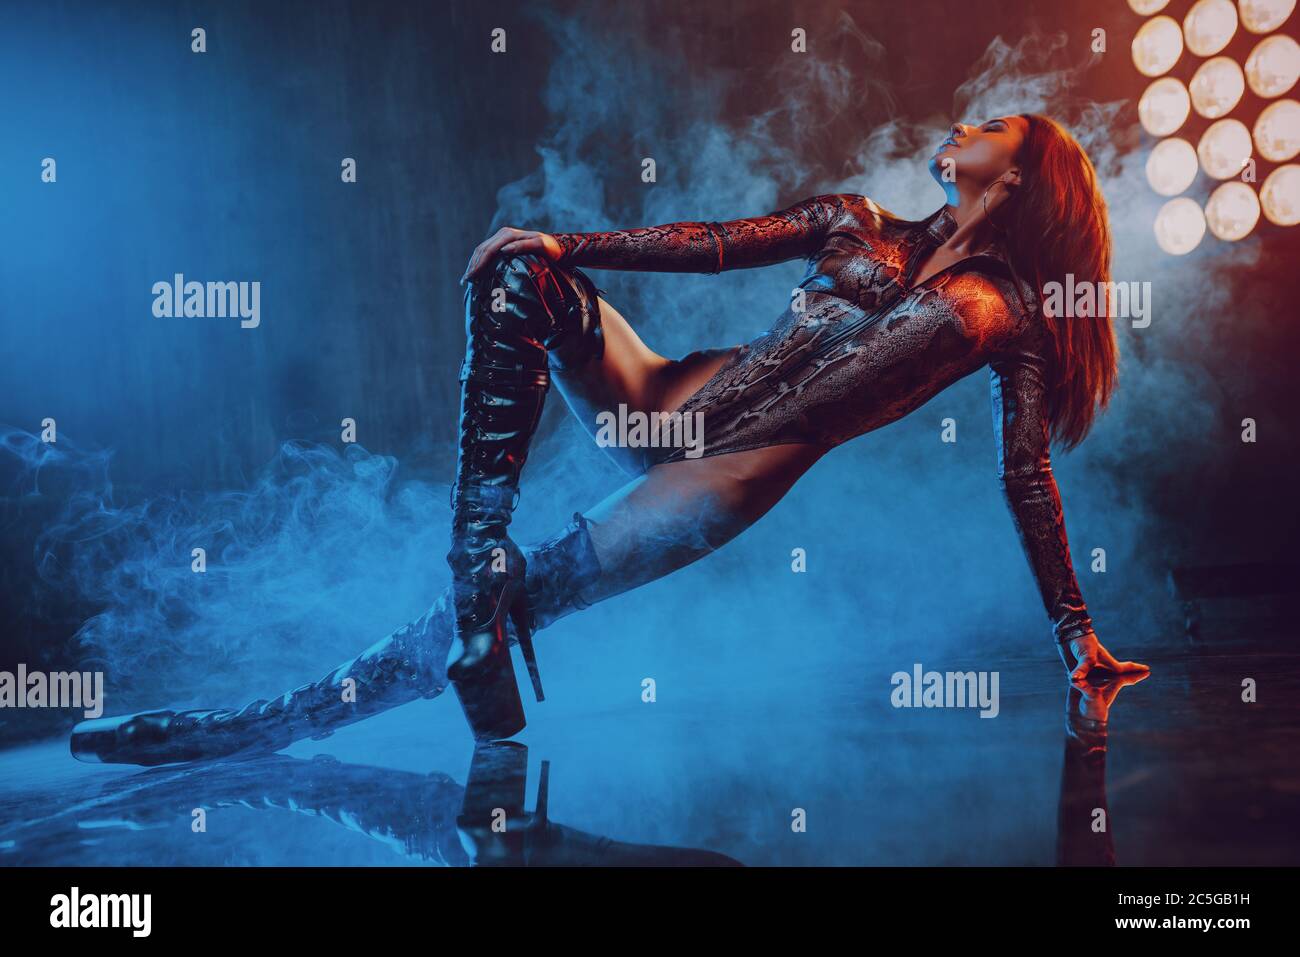 Young sexy woman dancer posing in studio with blue and red lights Stock Photo